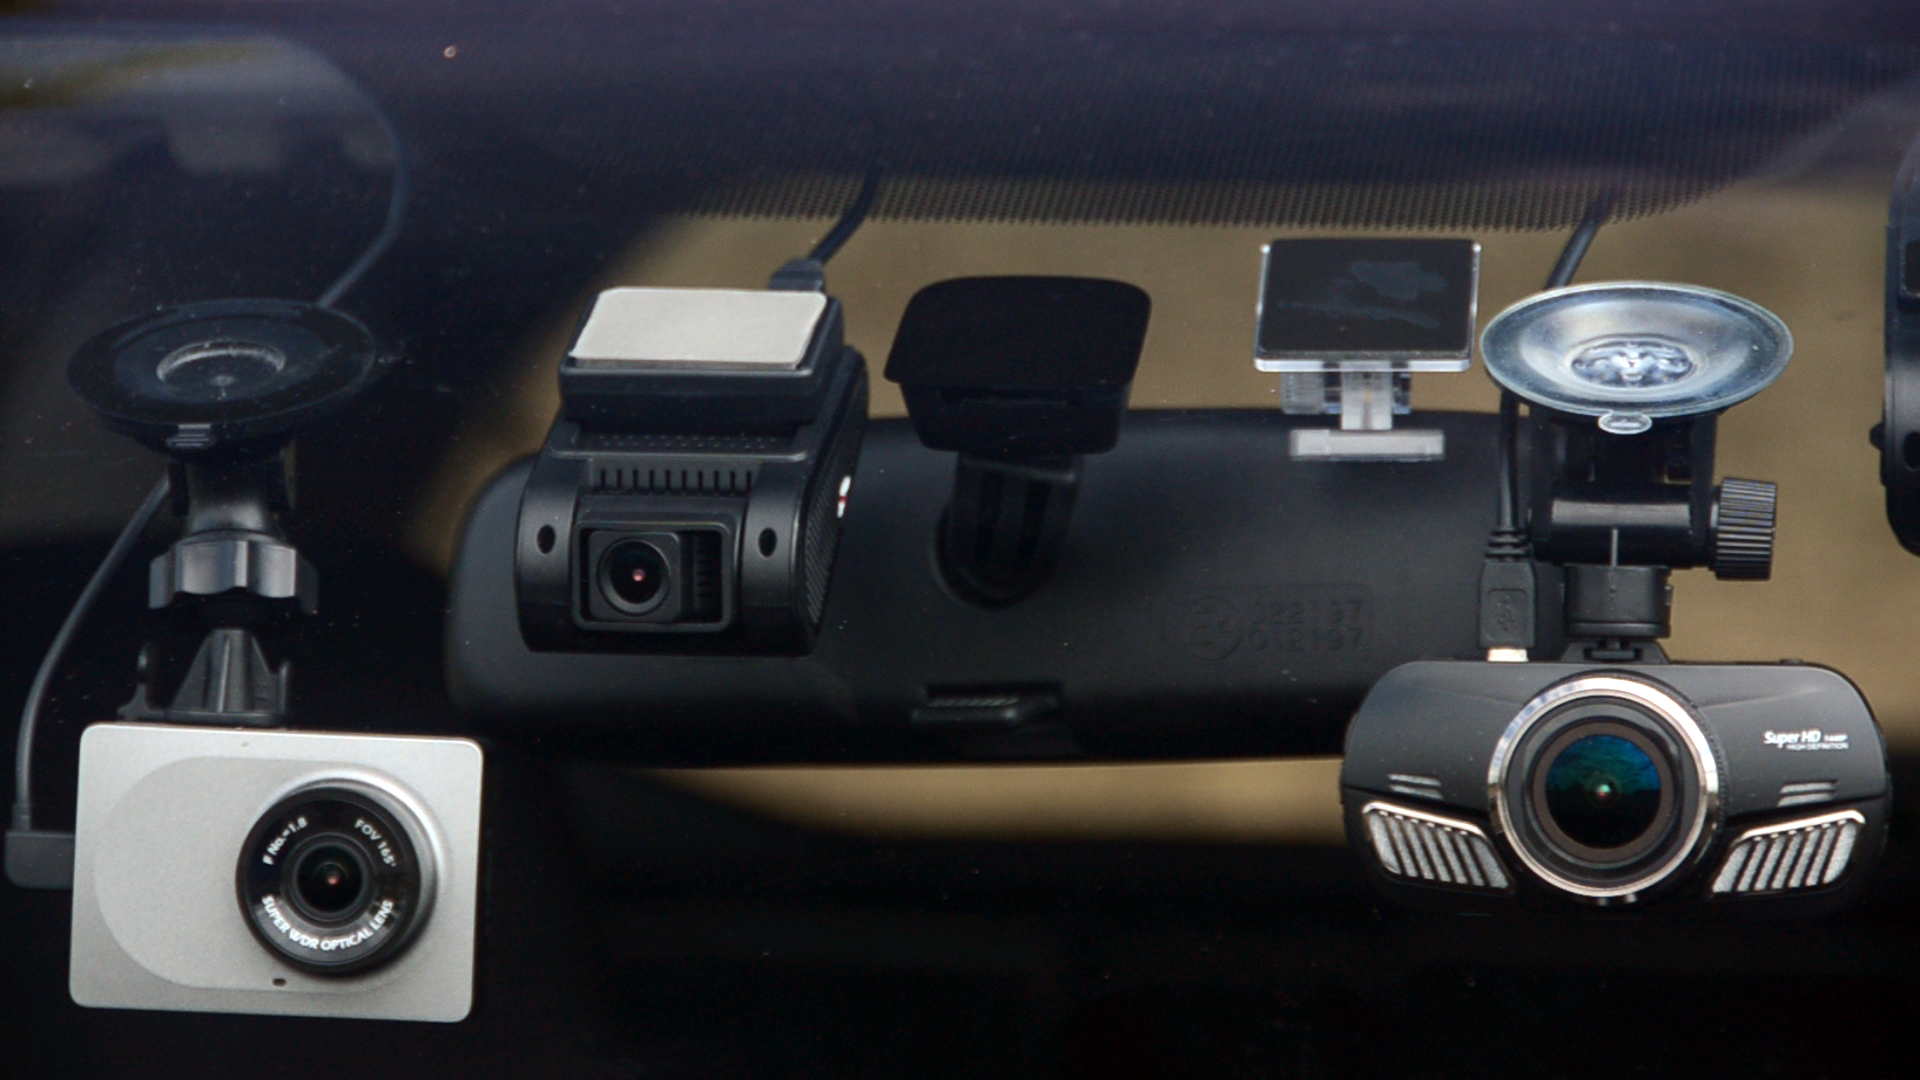 The Best Dash Cams Of 2019 The Top 8 Cameras Weve Tested